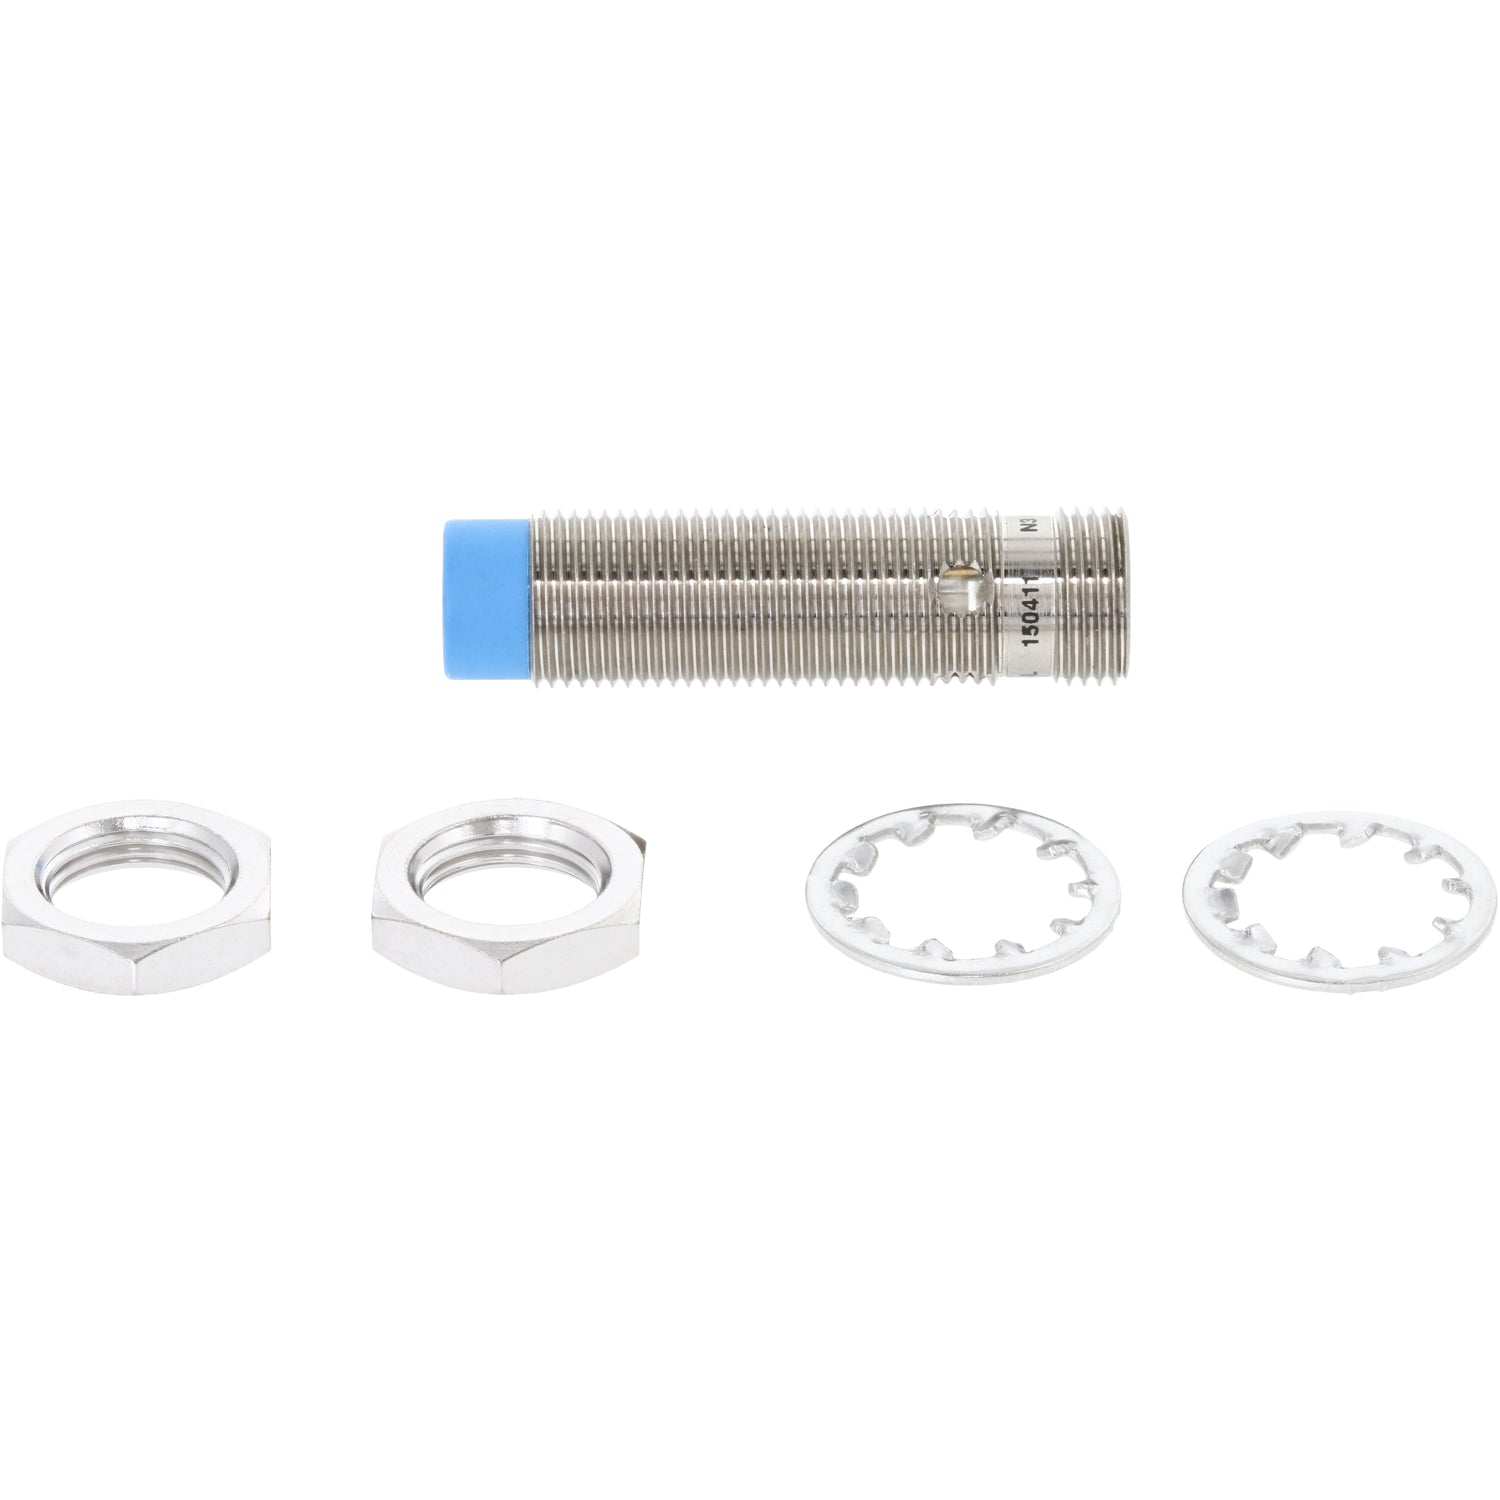 Blue tipped and threaded cylindrical proximity sensor with two hex nuts and star washers on white background. 